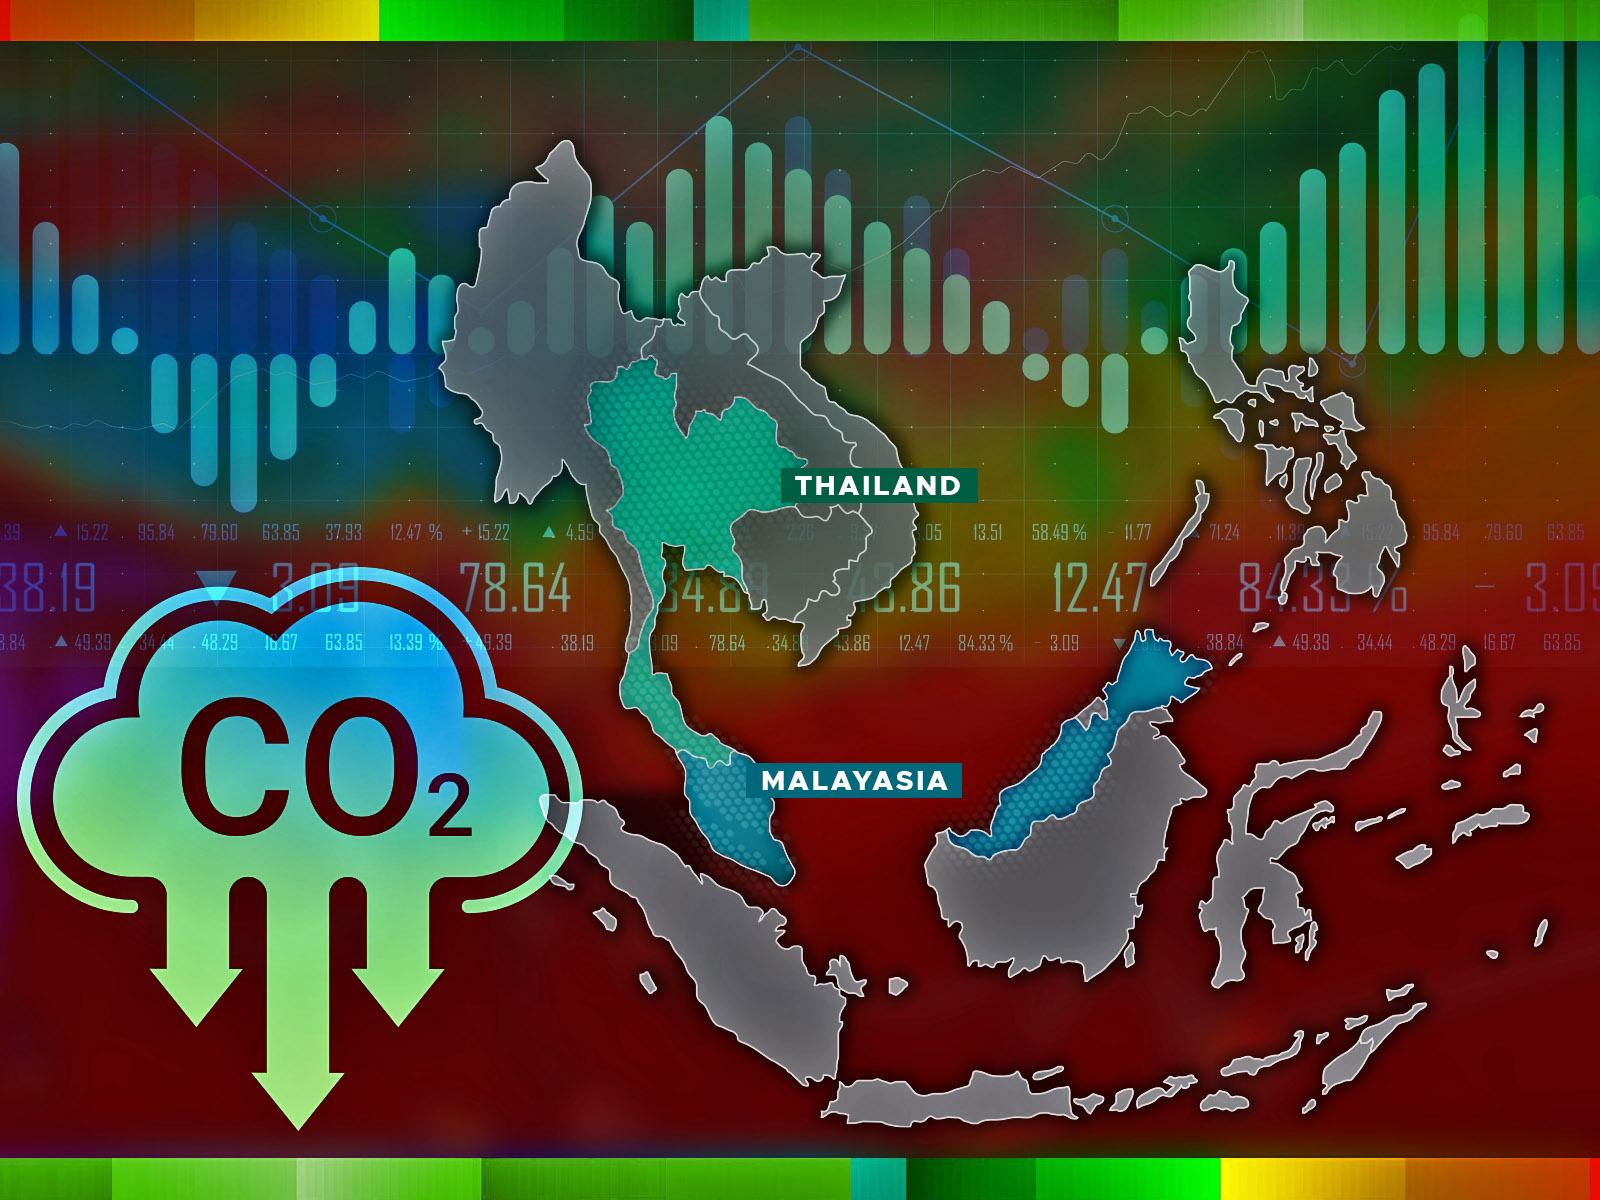 Image of digitized map of South-East Asia, with Malaysia and Thailand highlighted. Next to them is an icon of a cloud with "CO2" written on it with arrows pointing down.